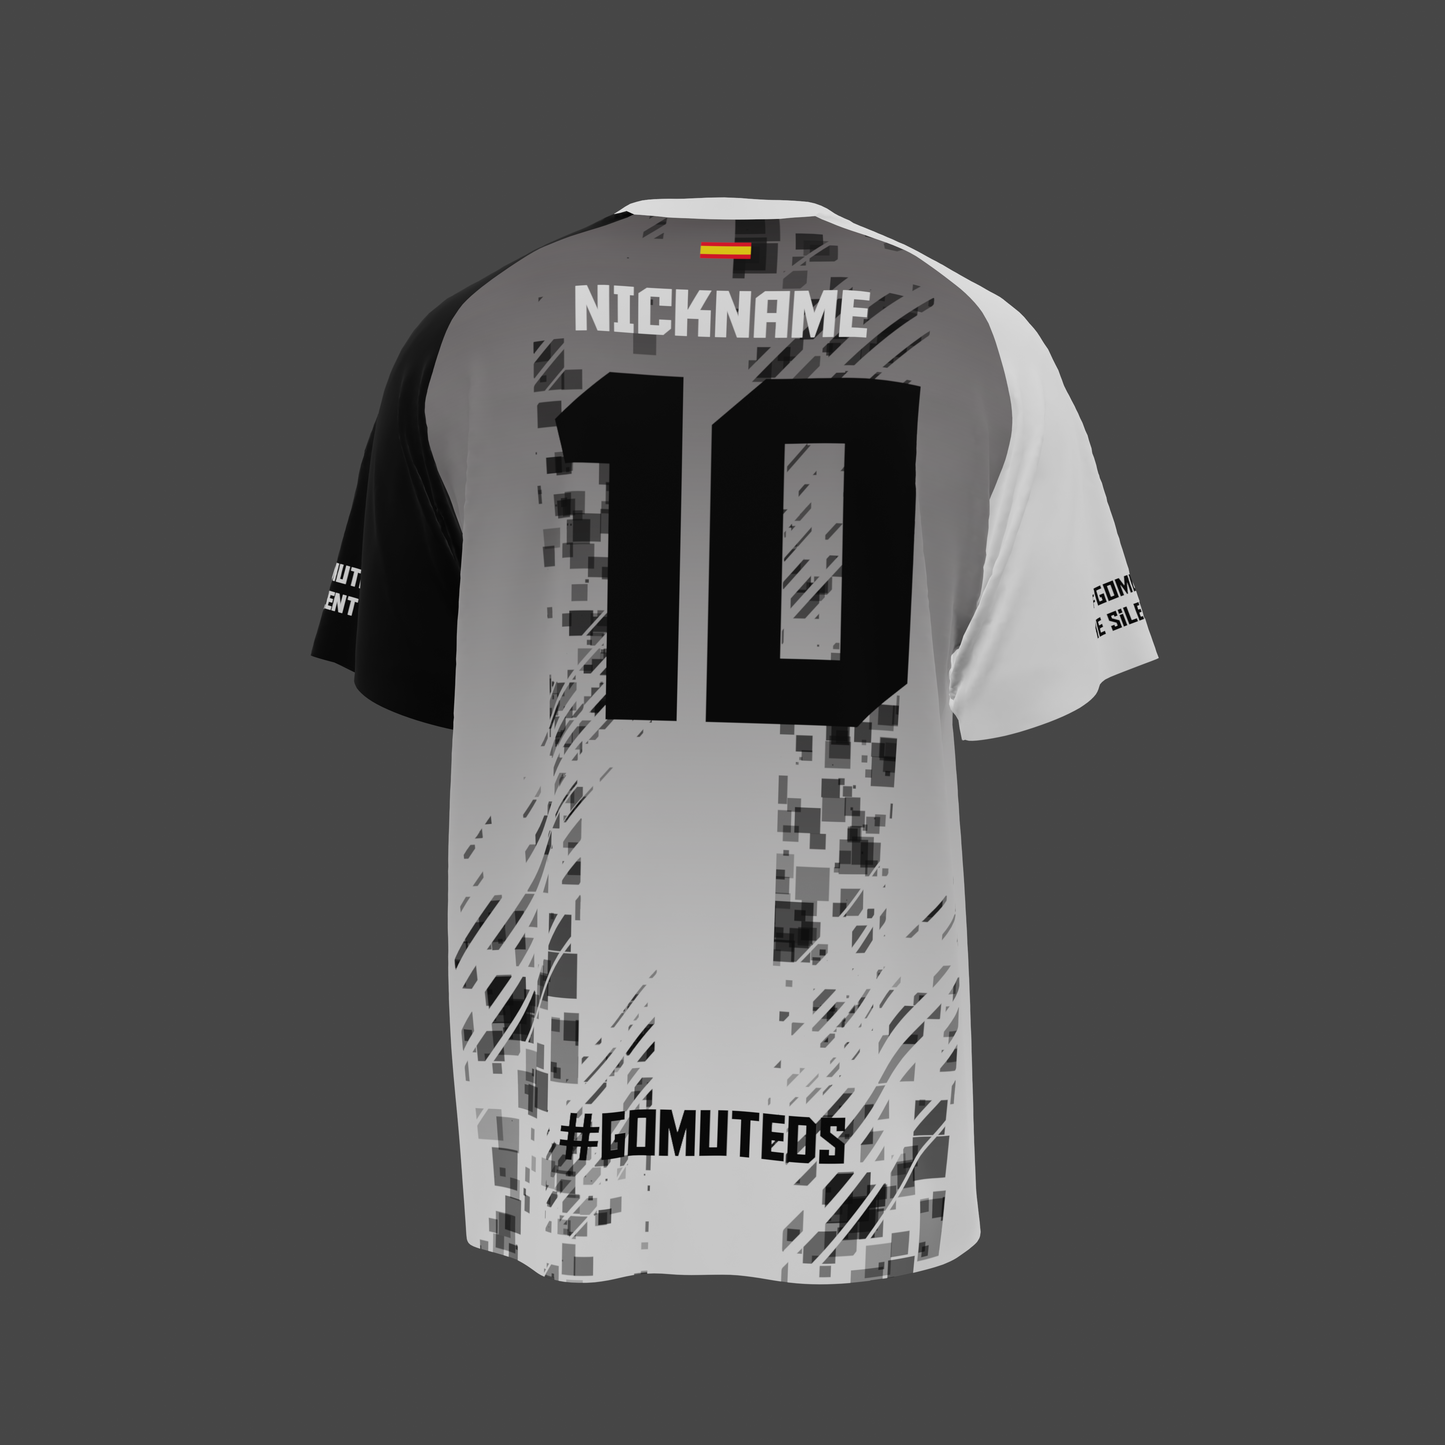 MotionTech TheSilentAzh Jersey